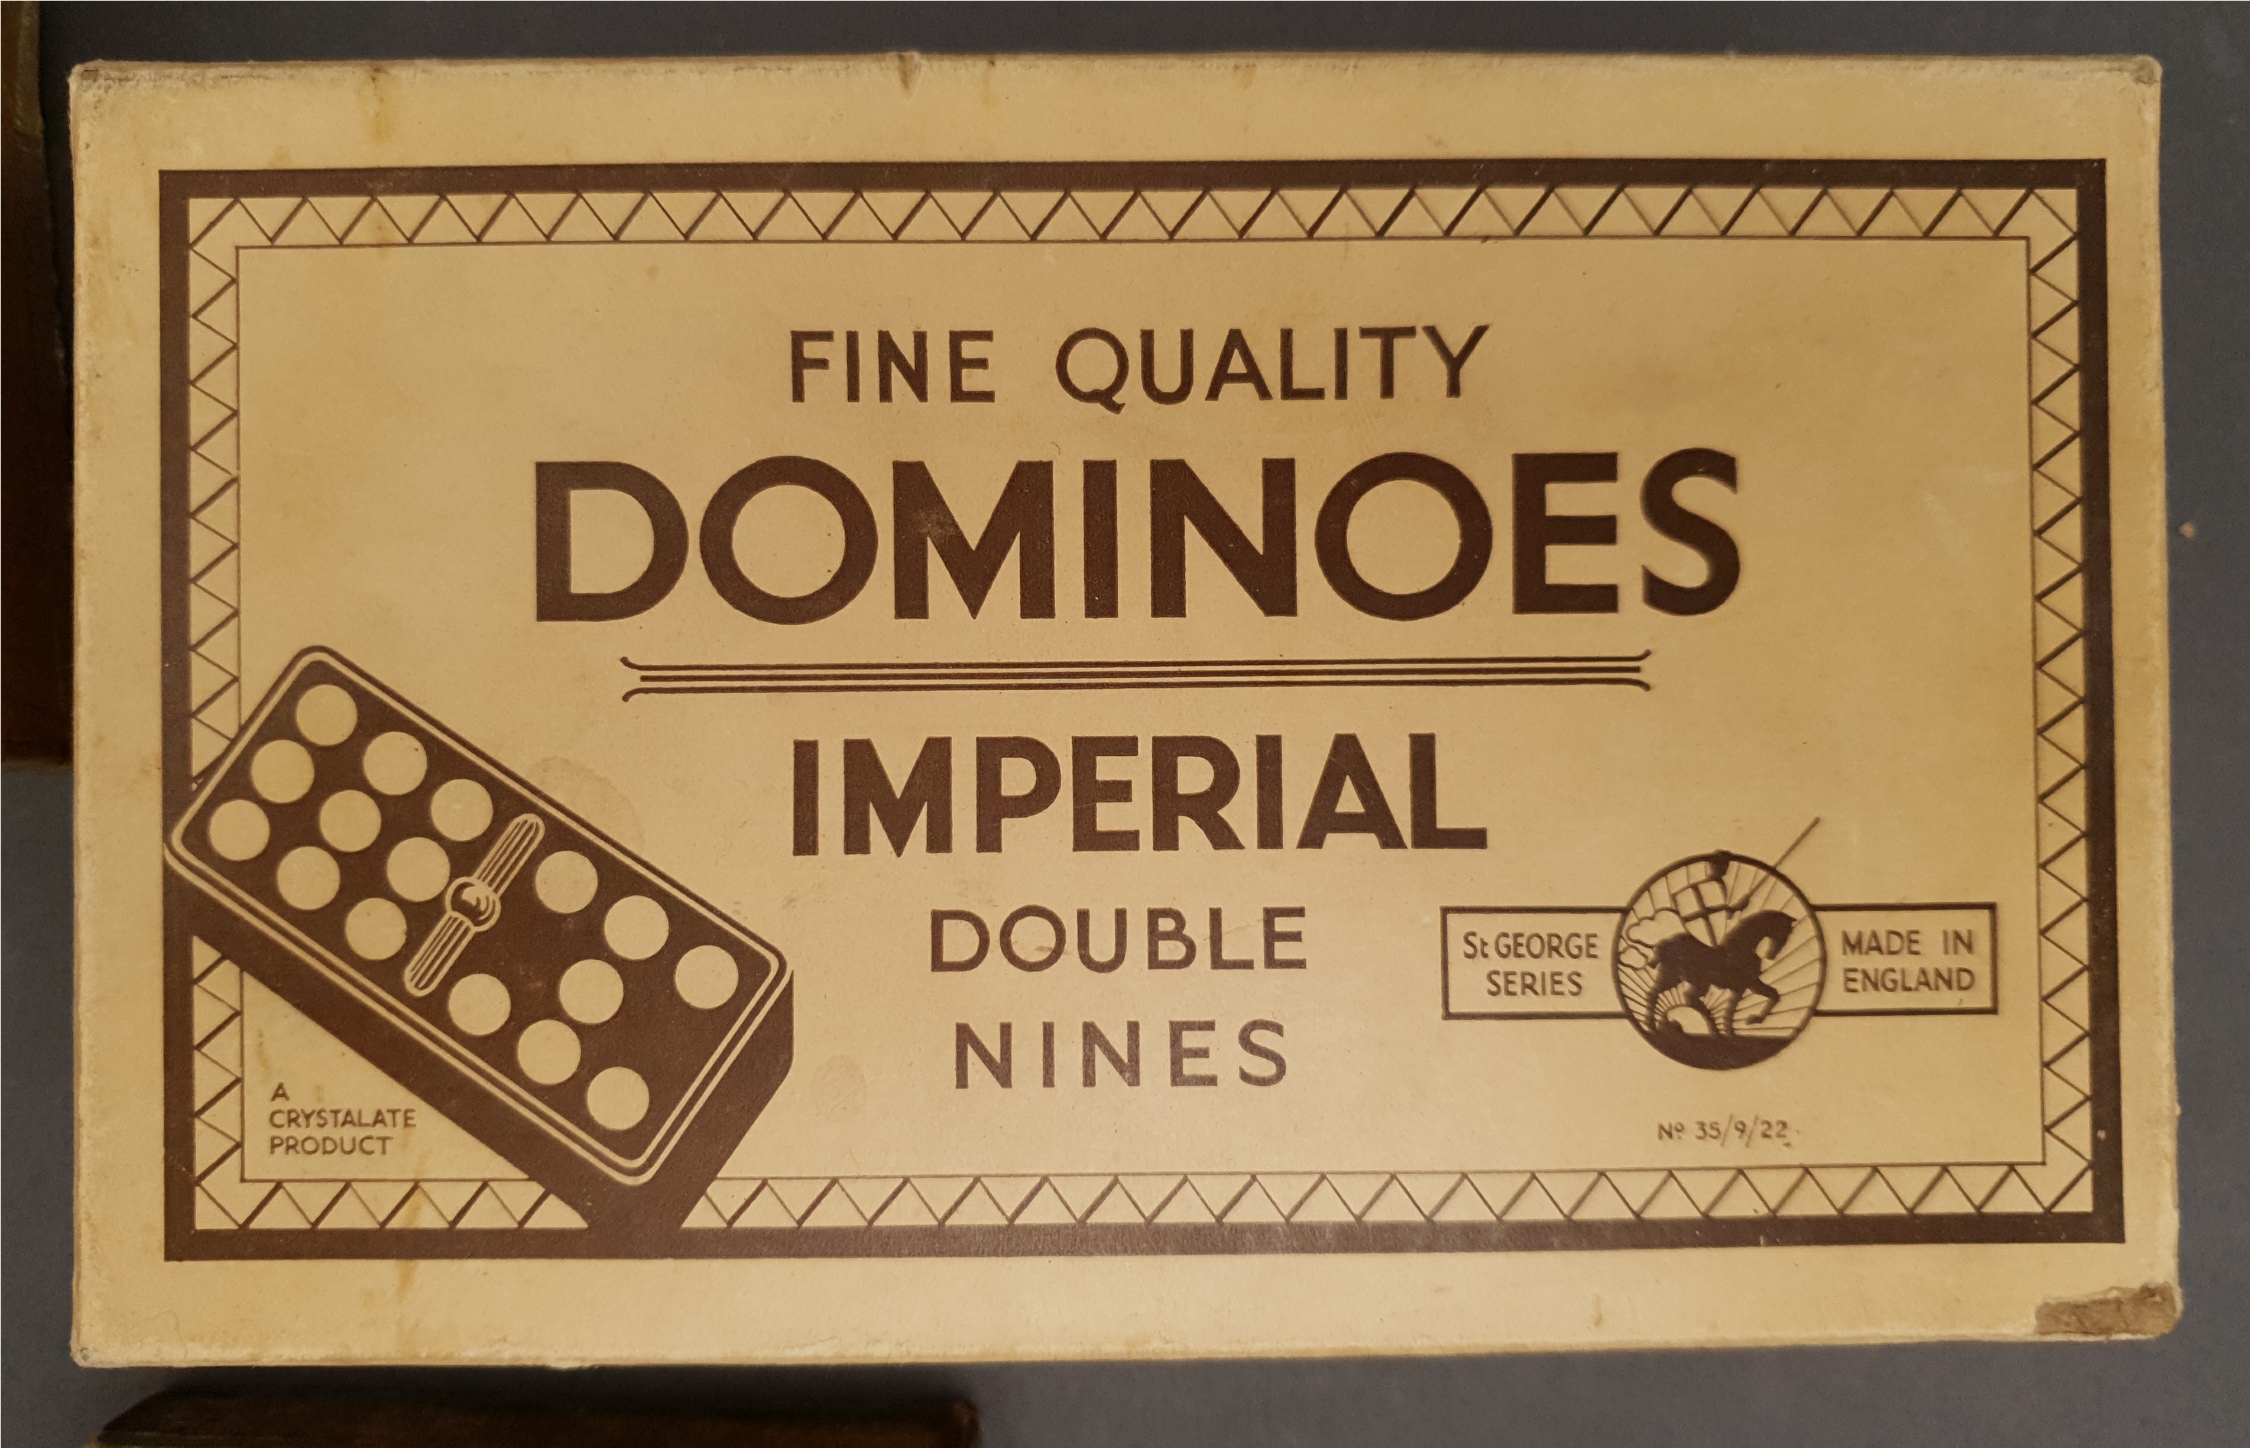 Antique Vintage Parcel of 3 Assorted Dominoe Sets Includes Imperial Double Nines & Bone Dominoes. - Image 4 of 4